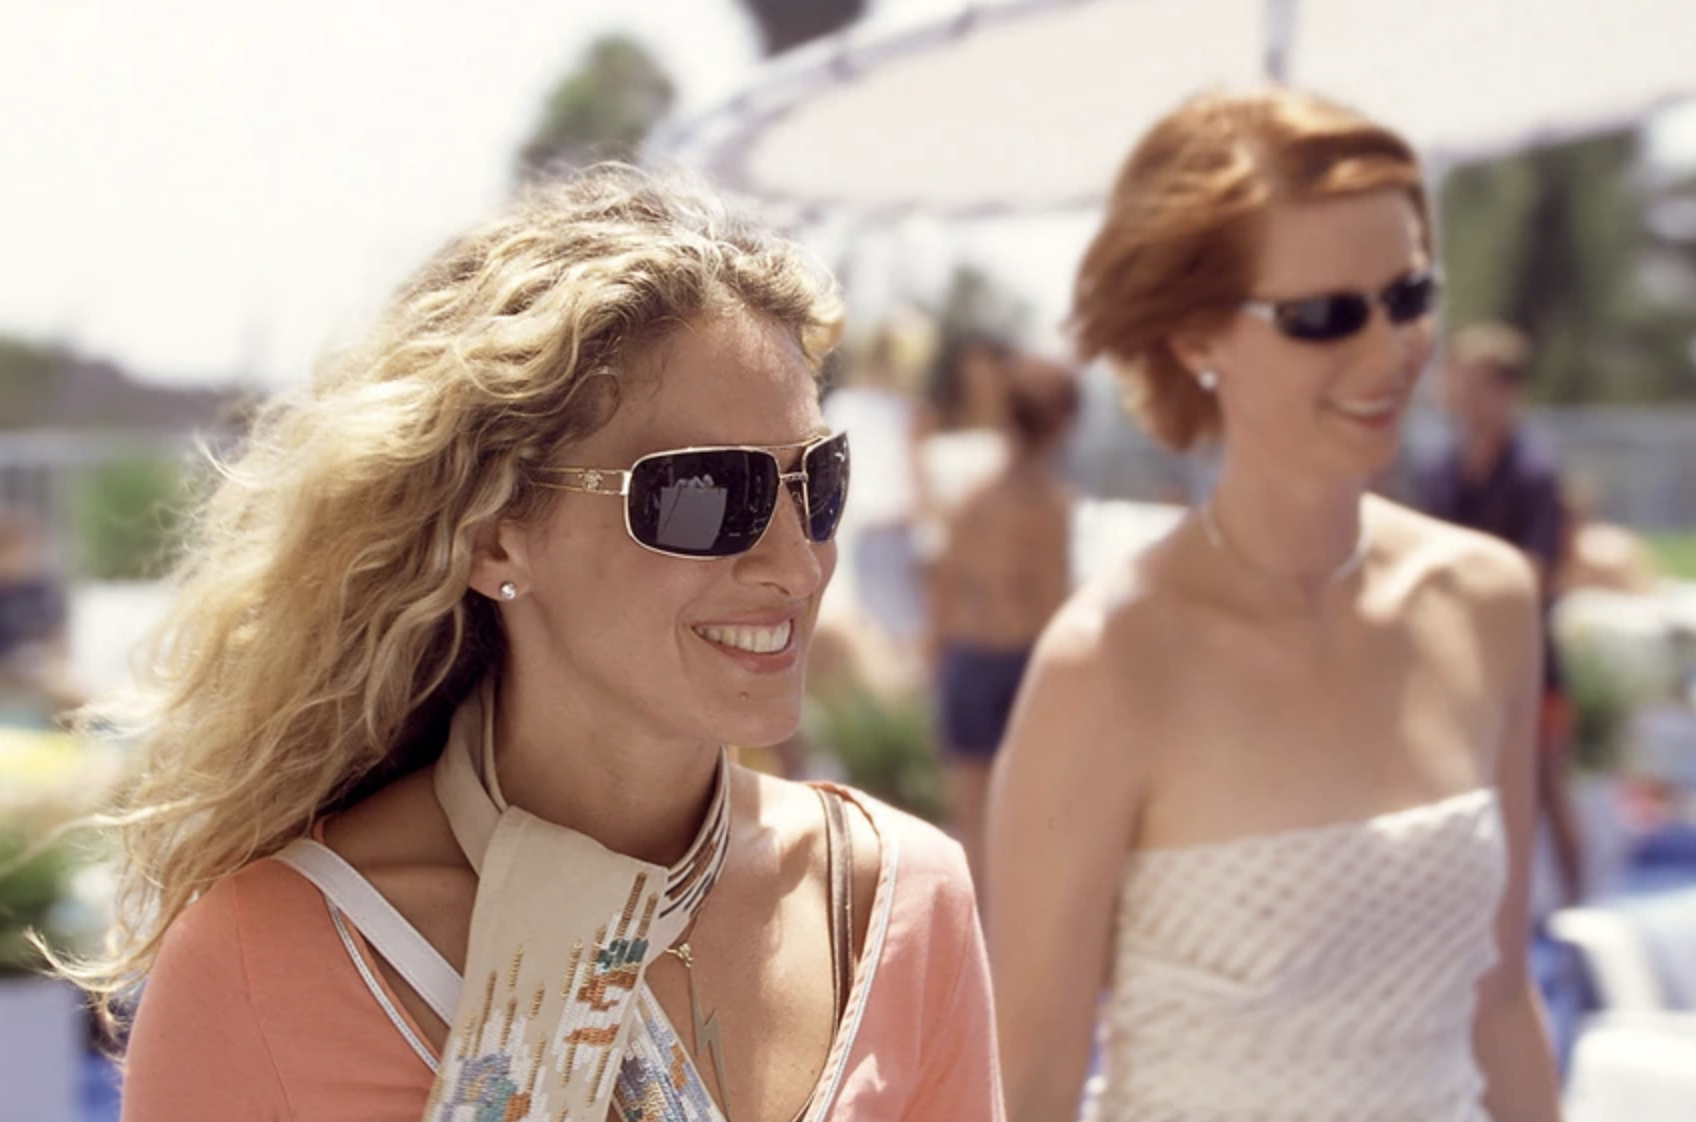 SJP and Cynthia smiling and wearing sunglasses in a scene from the show